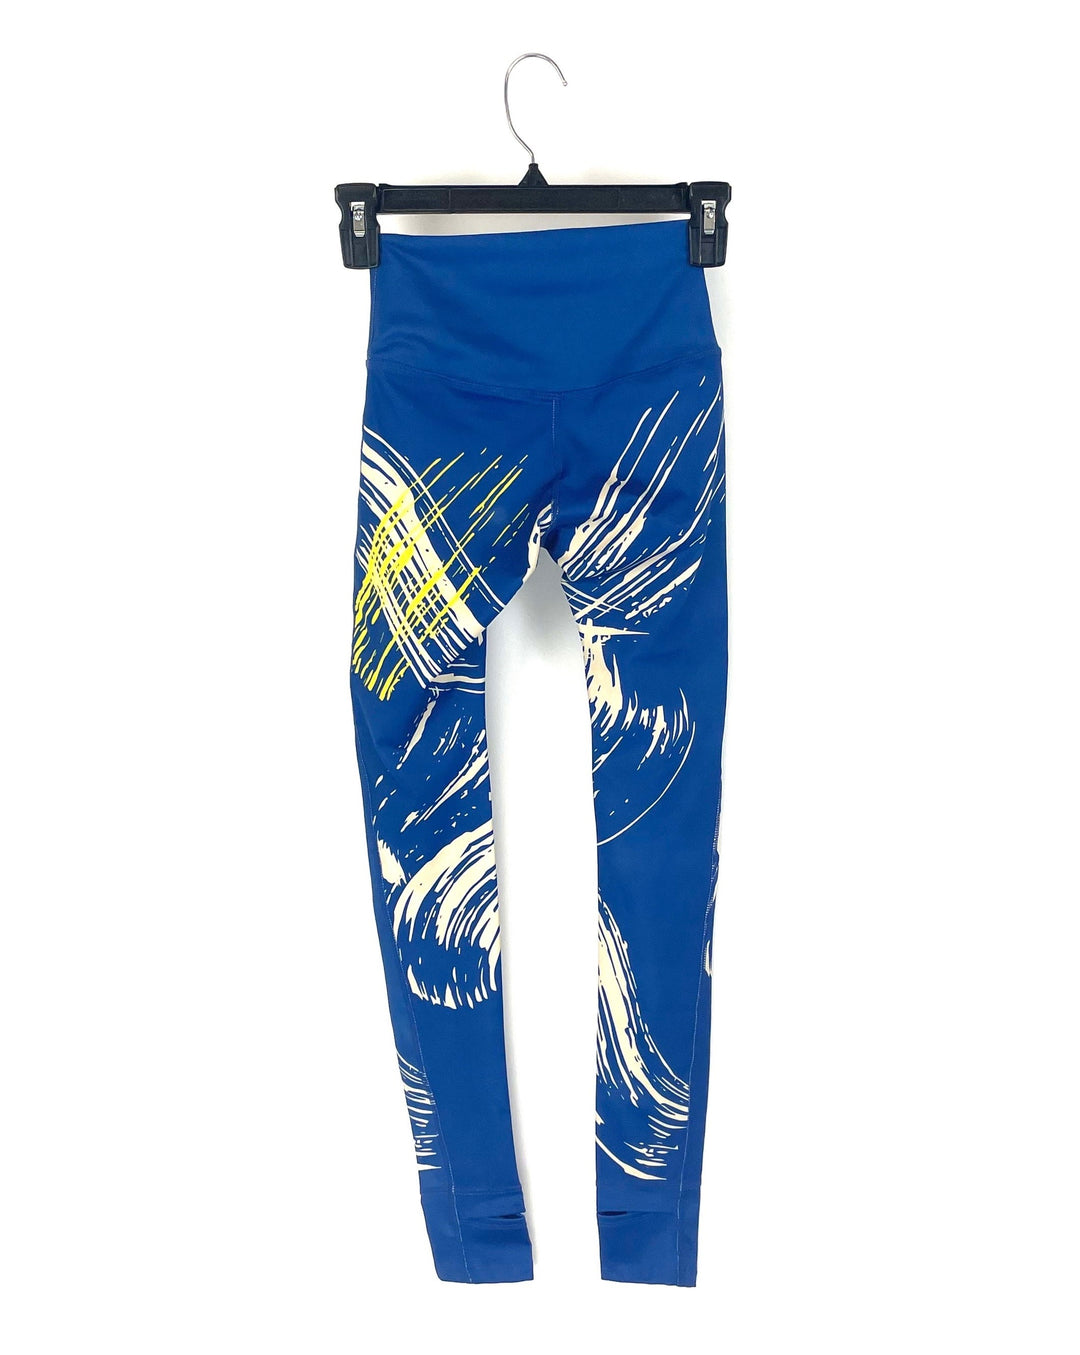 Blue Abstract Design Leggings - Size 000 and 00